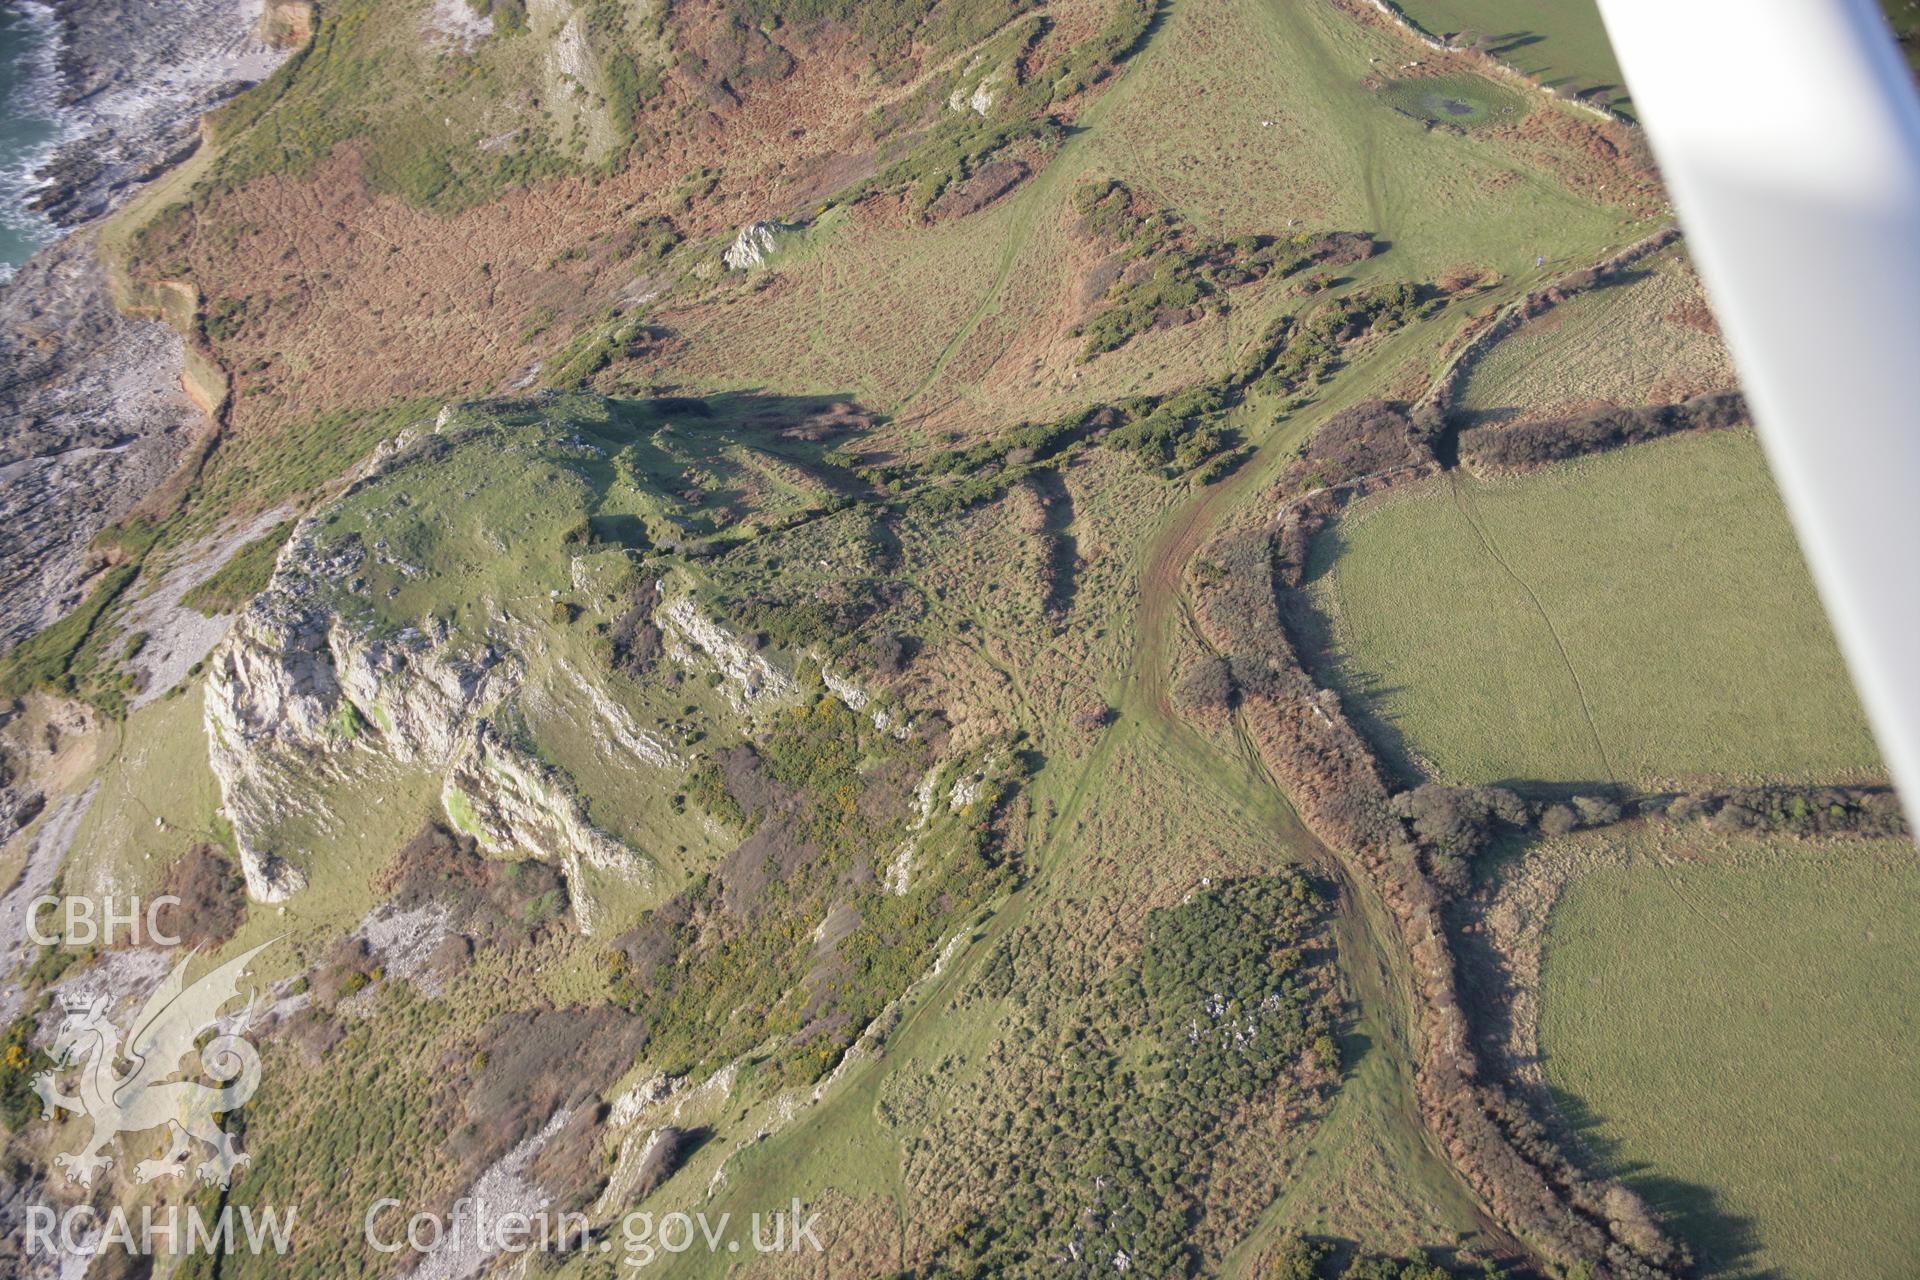 RCAHMW colour oblique aerial photograph of High Pennard Hillfort from the north-east. Taken on 26 January 2006 by Toby Driver.